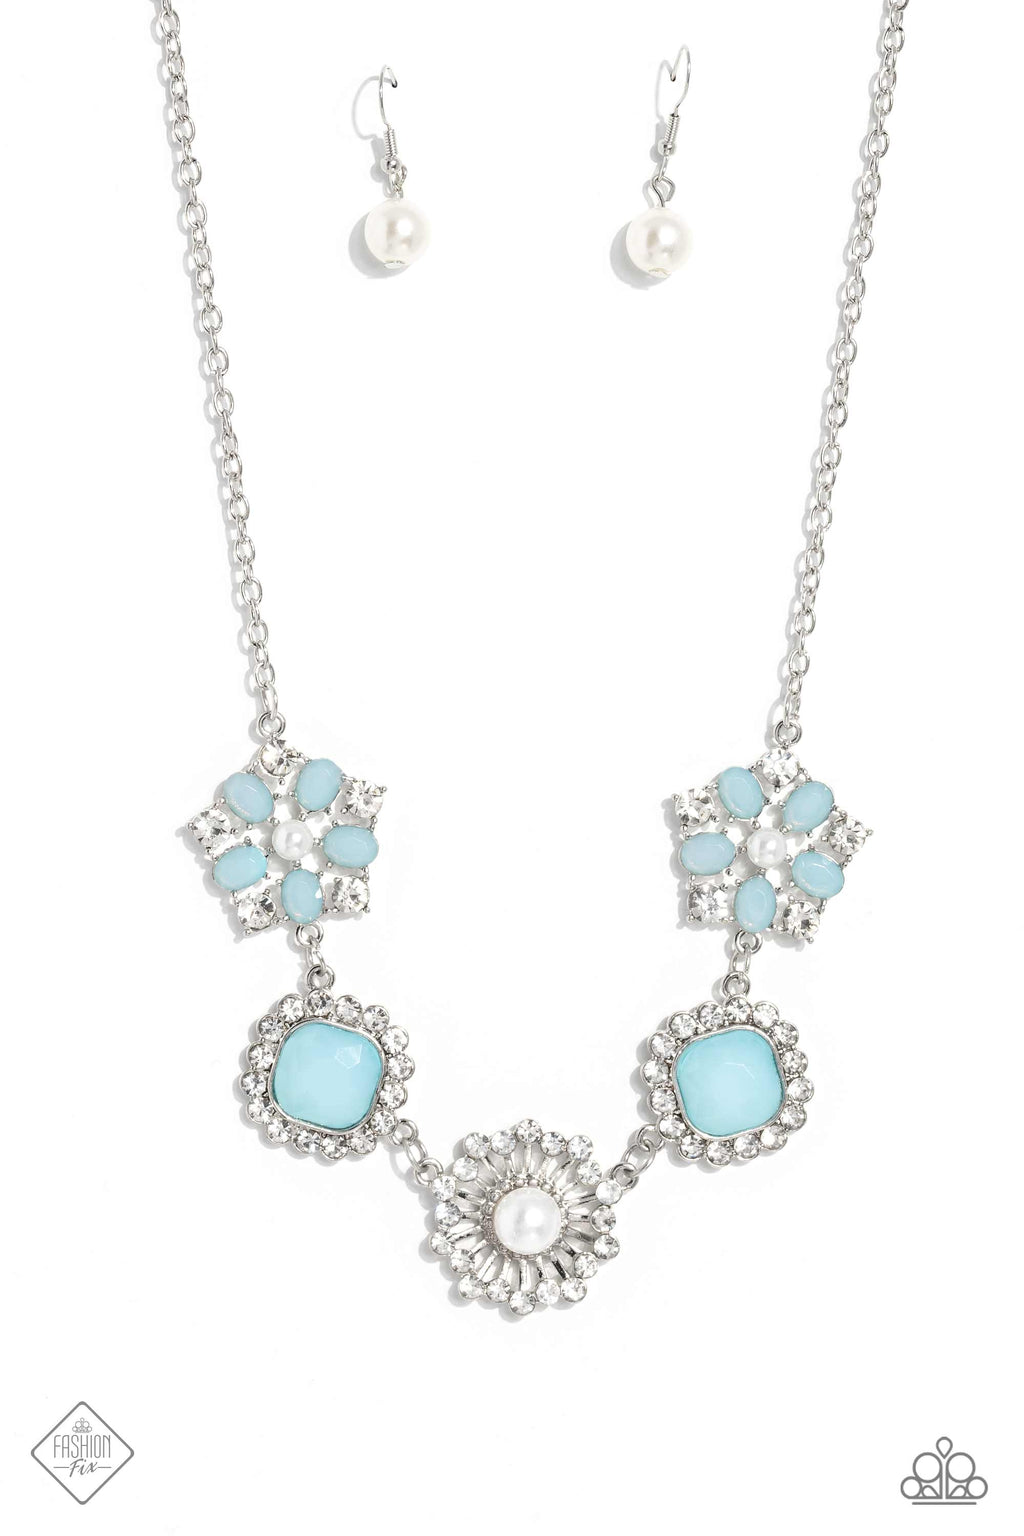 five-dollar-jewelry-flower-crown-blue-necklace-paparazzi-accessories